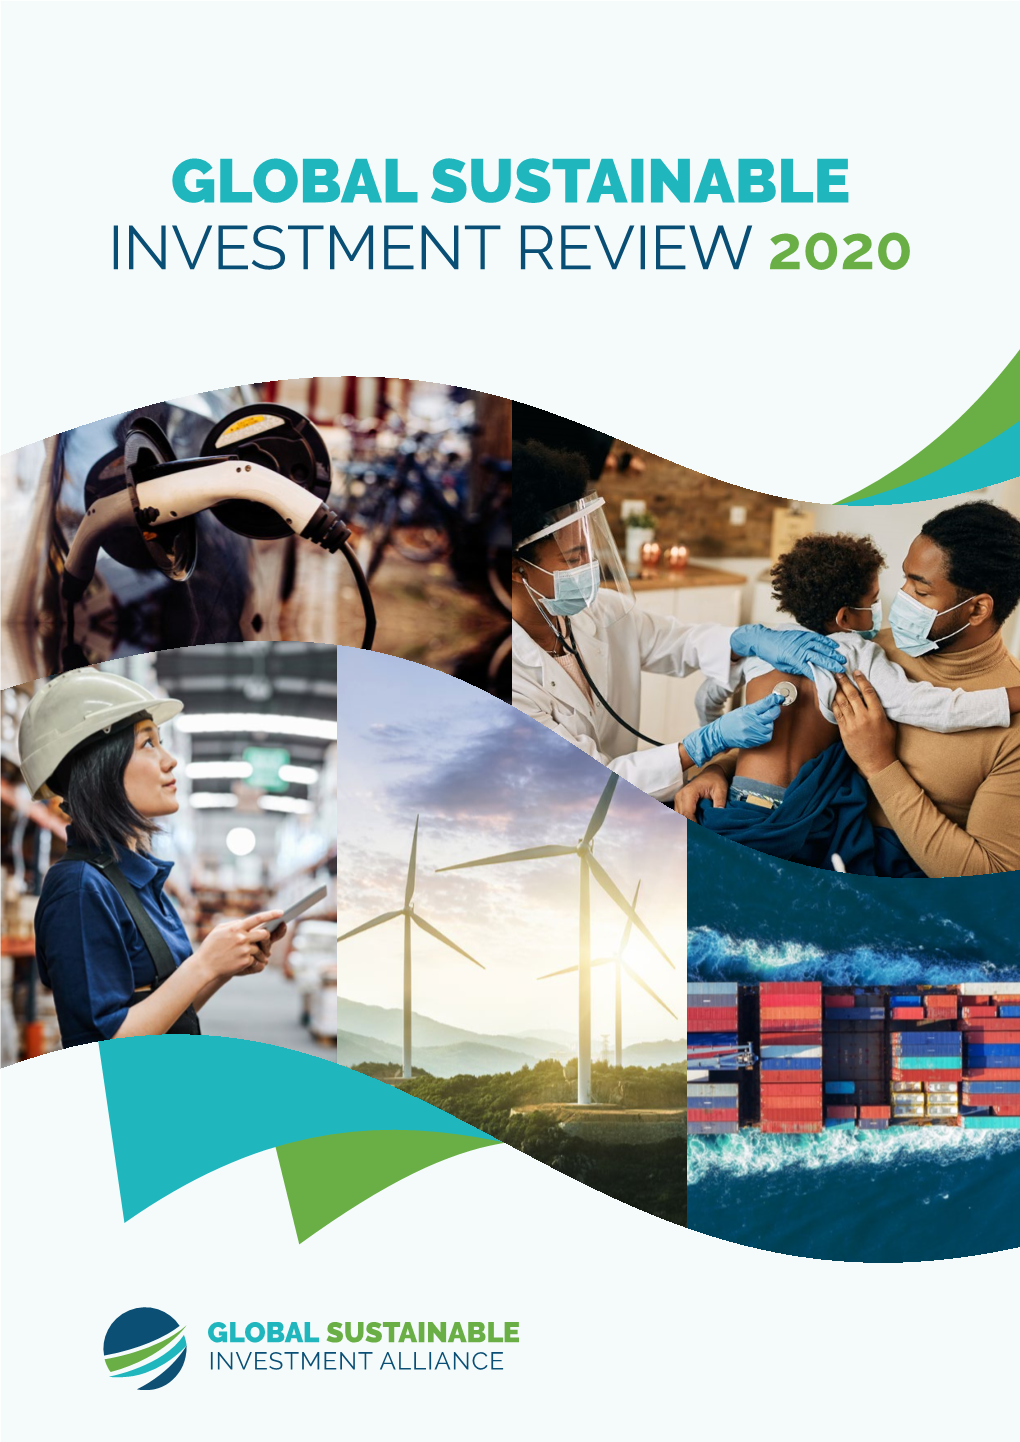 GLOBAL SUSTAINABLE INVESTMENT REVIEW 2020 RBC Global Asset Management Robeco